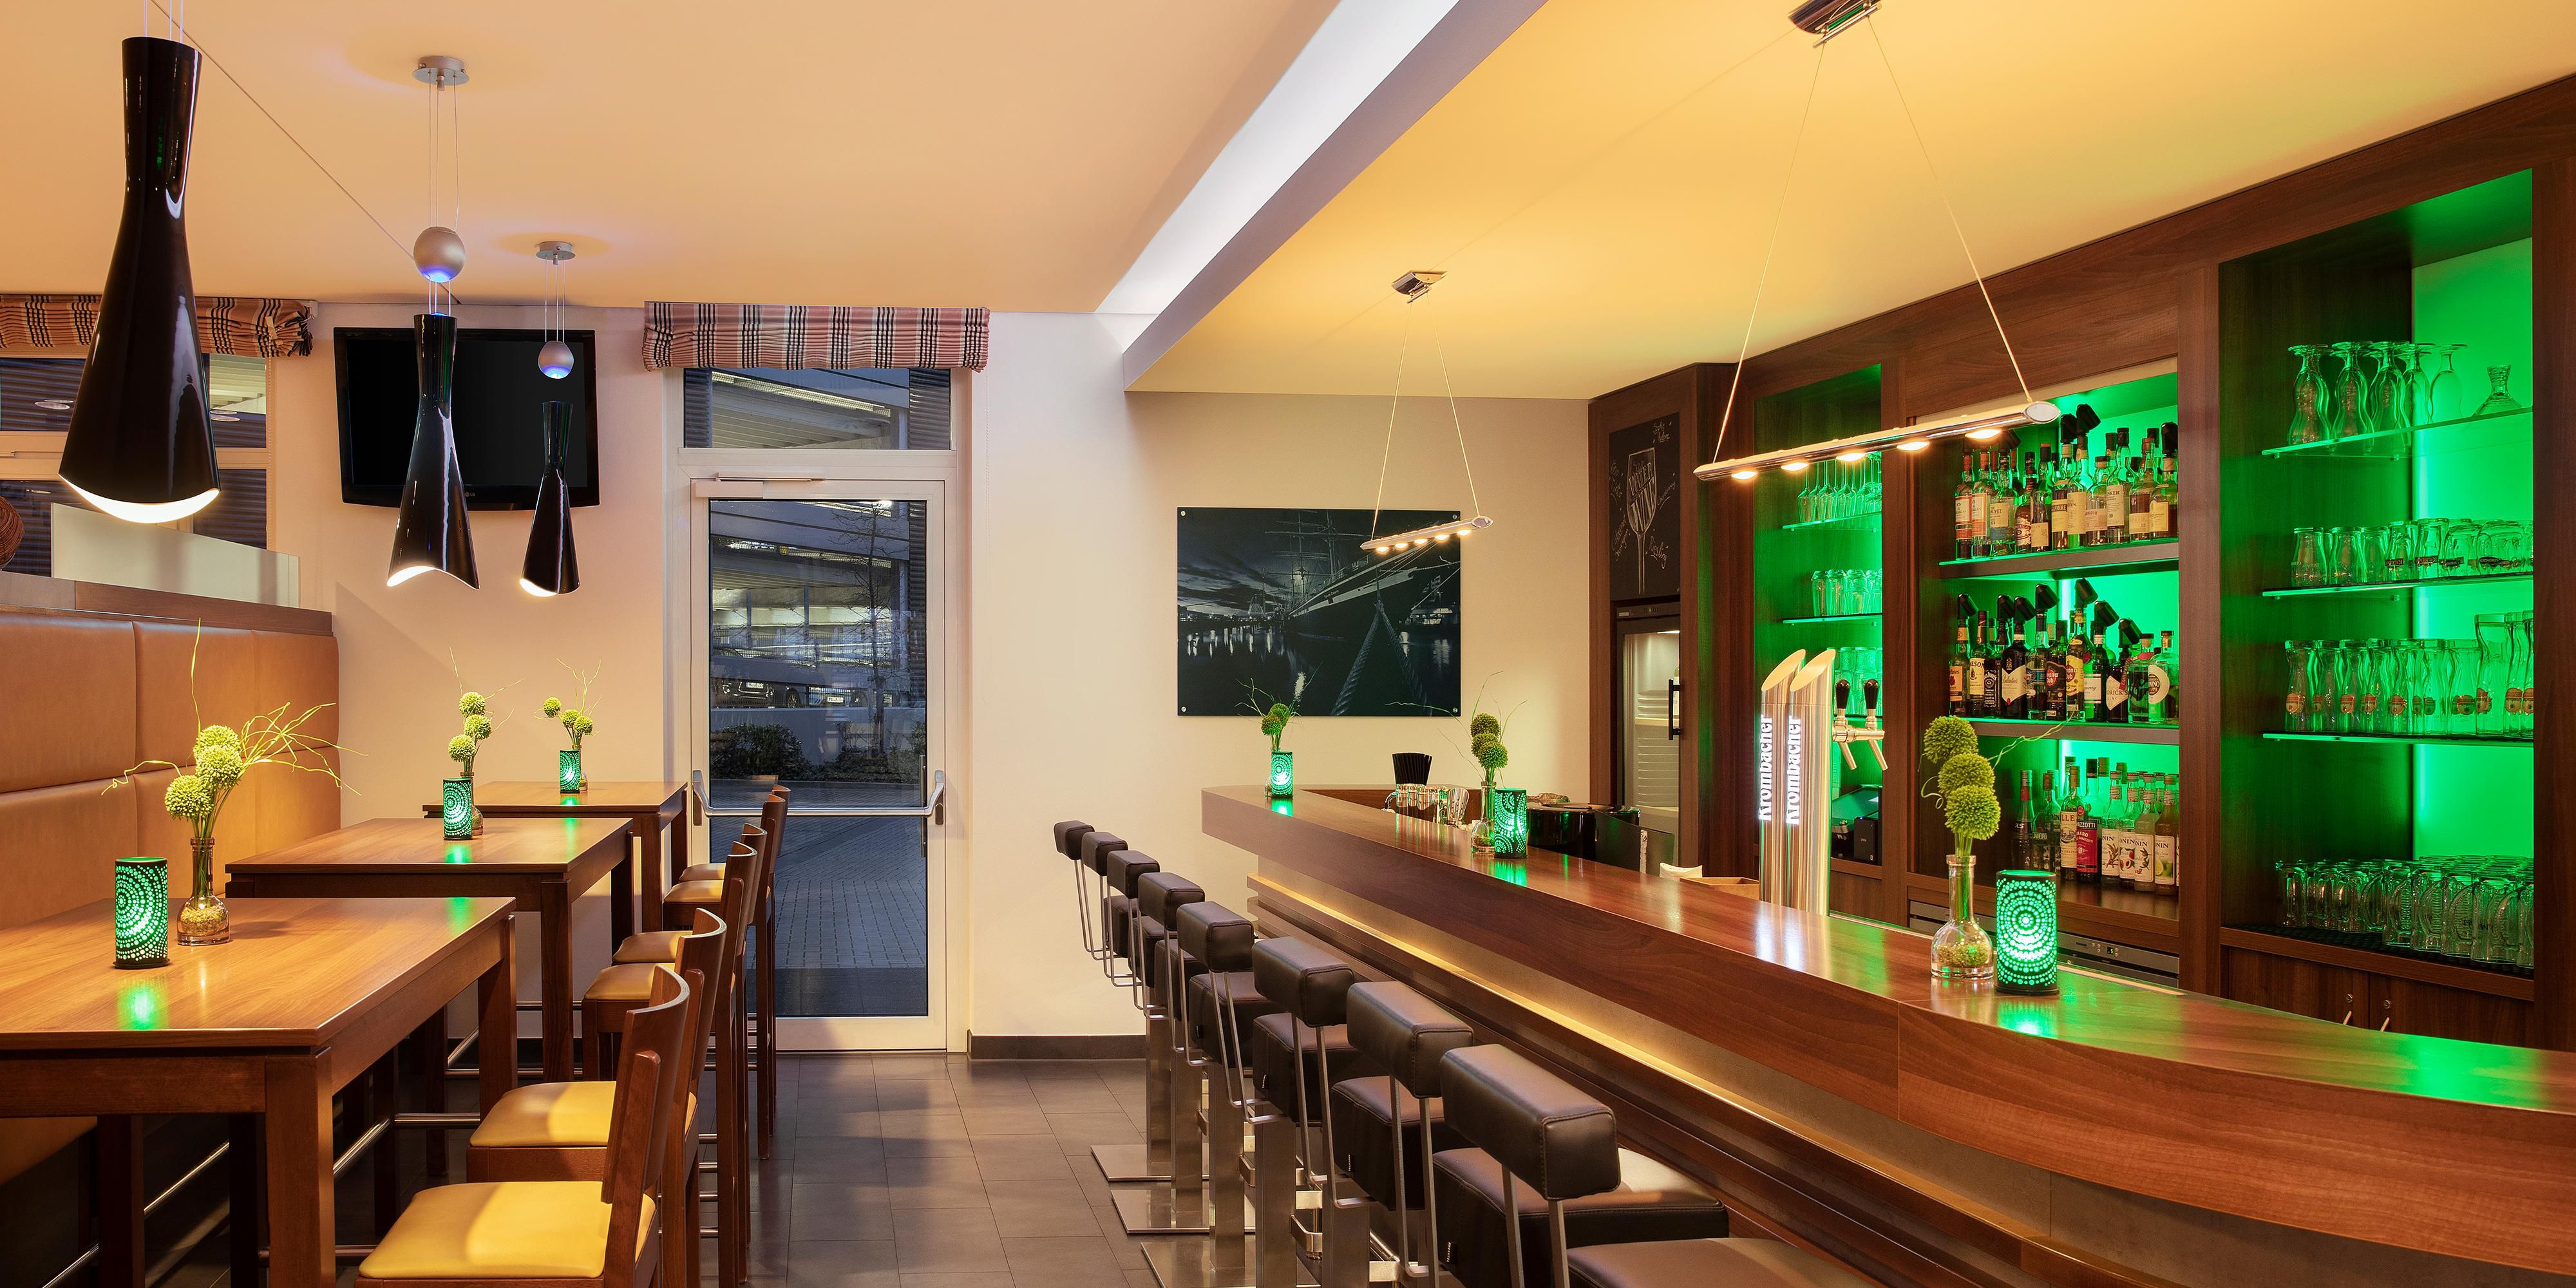 Our hotel bar is a relaxed meeting place for a friendly get-together. Enjoy a refreshing soft drink, freshly brewed coffee, a cool beer or a fruity cocktail in our bar at the Holiday Inn Express Bremen Airport.